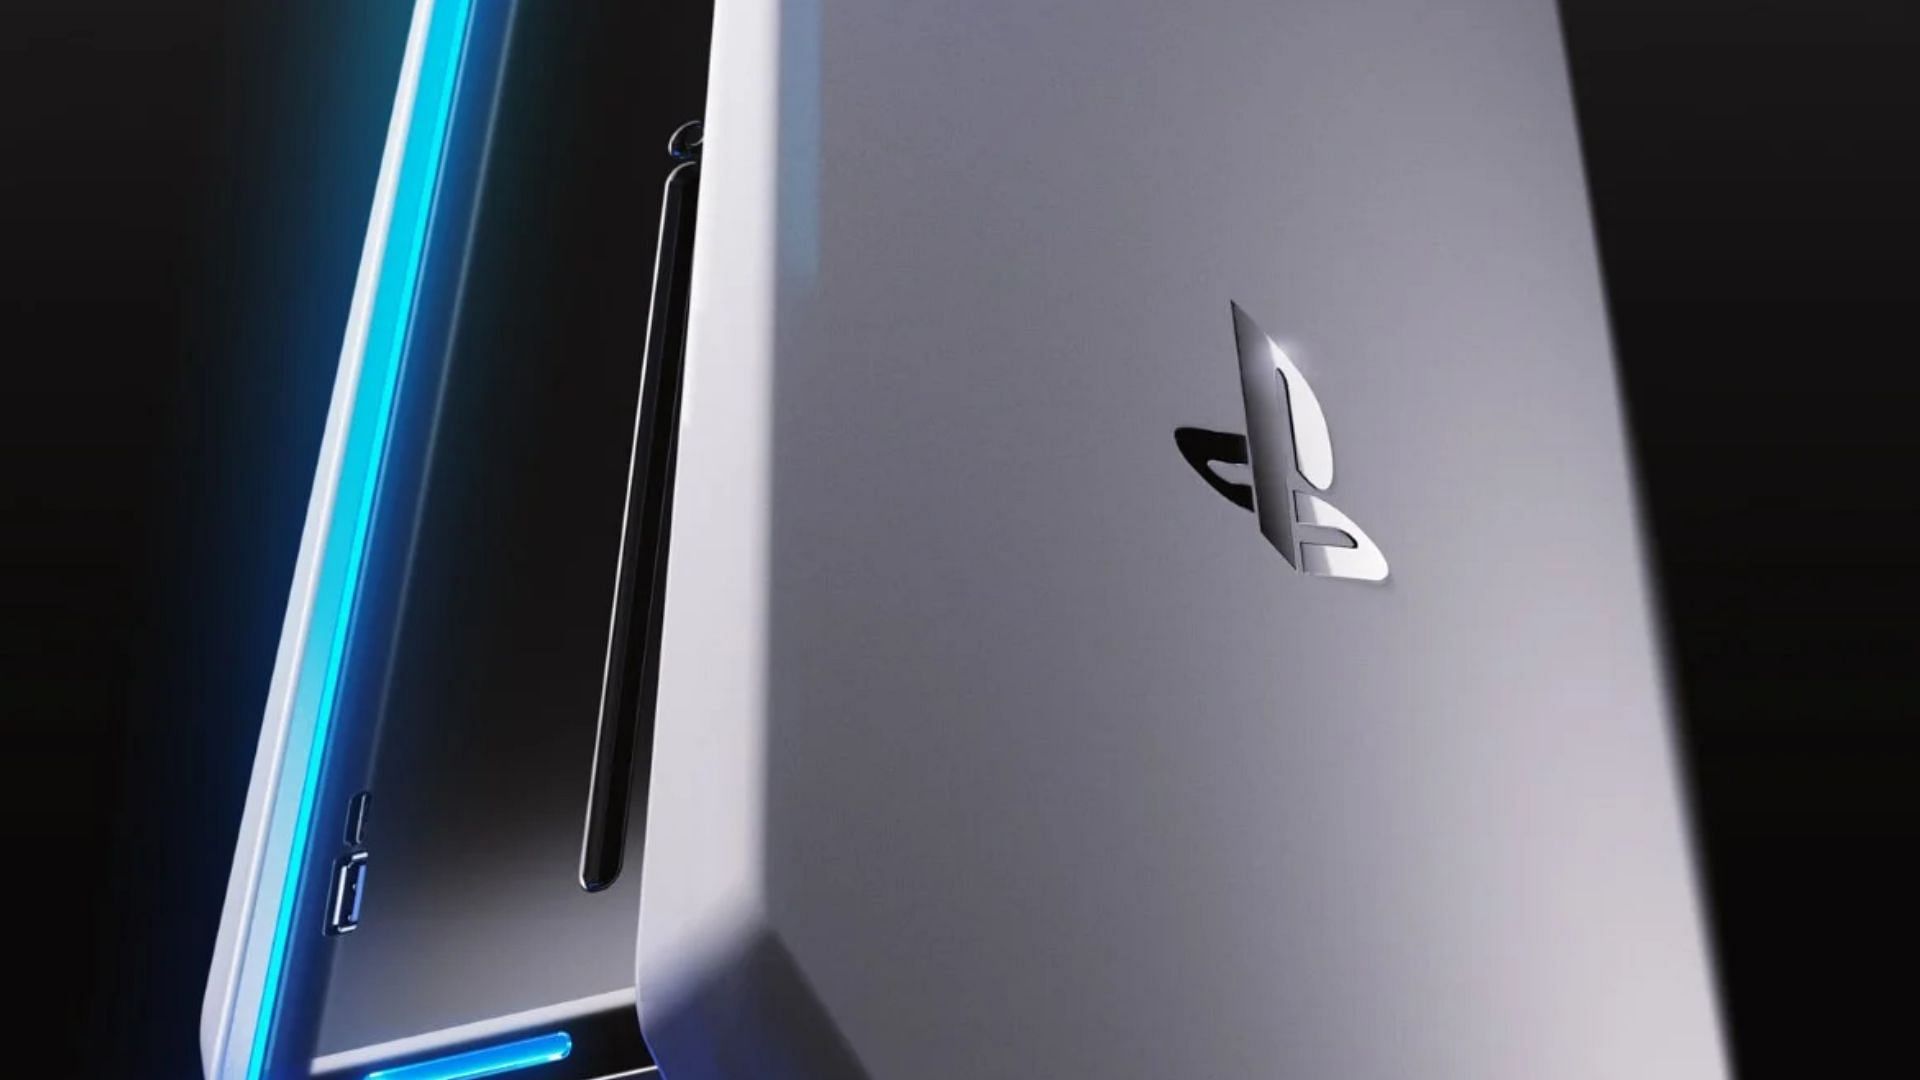 PS5 Pro specs leak shows a mighty upgrade, and we could get it in